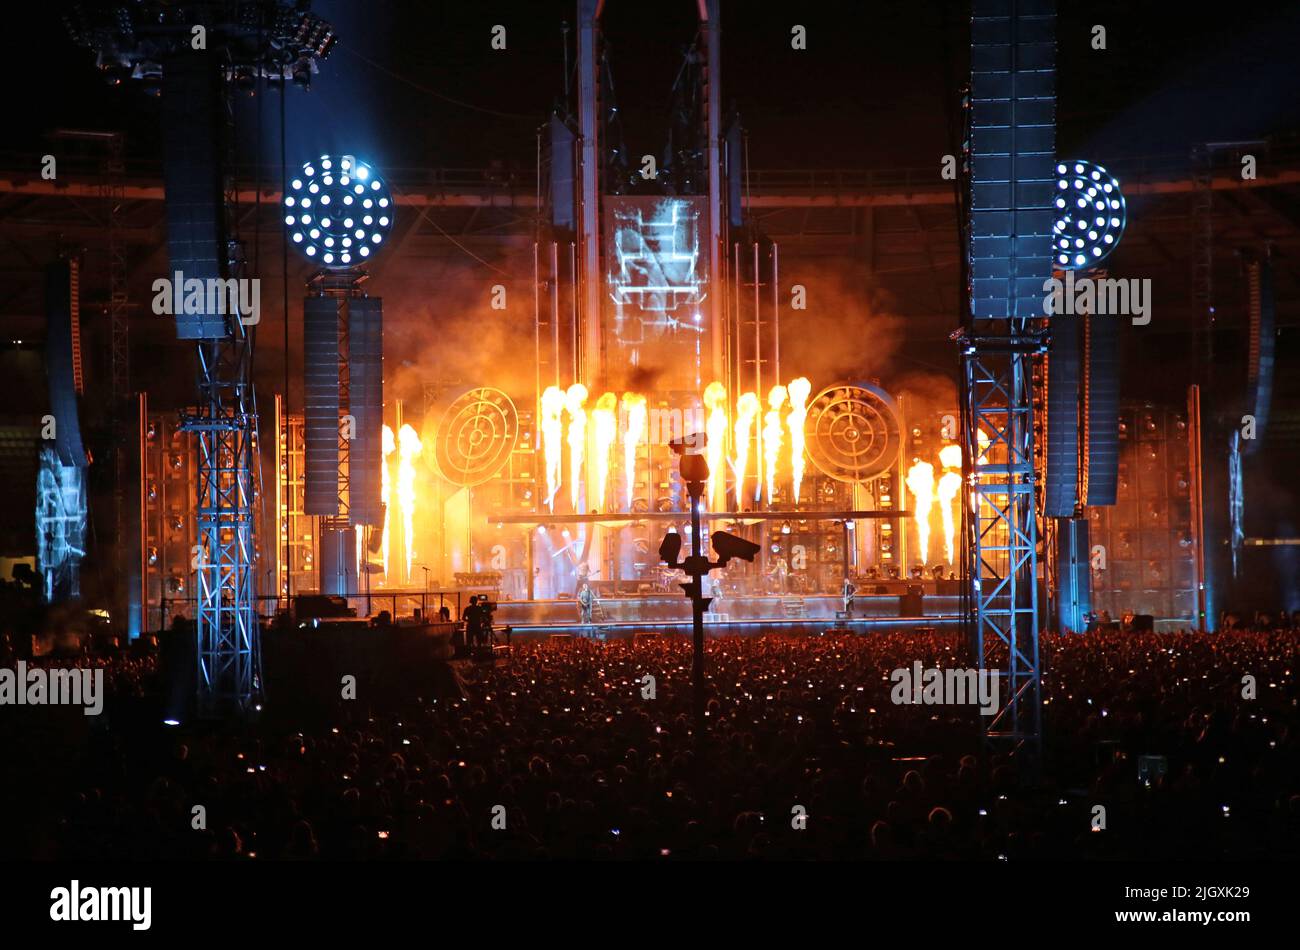 TURIN, ITALY - JULY 12 : Rammstein concert during 'Europe Stadium Tour 2022' on July 12, 2022 in Turin, Italy Stock Photo